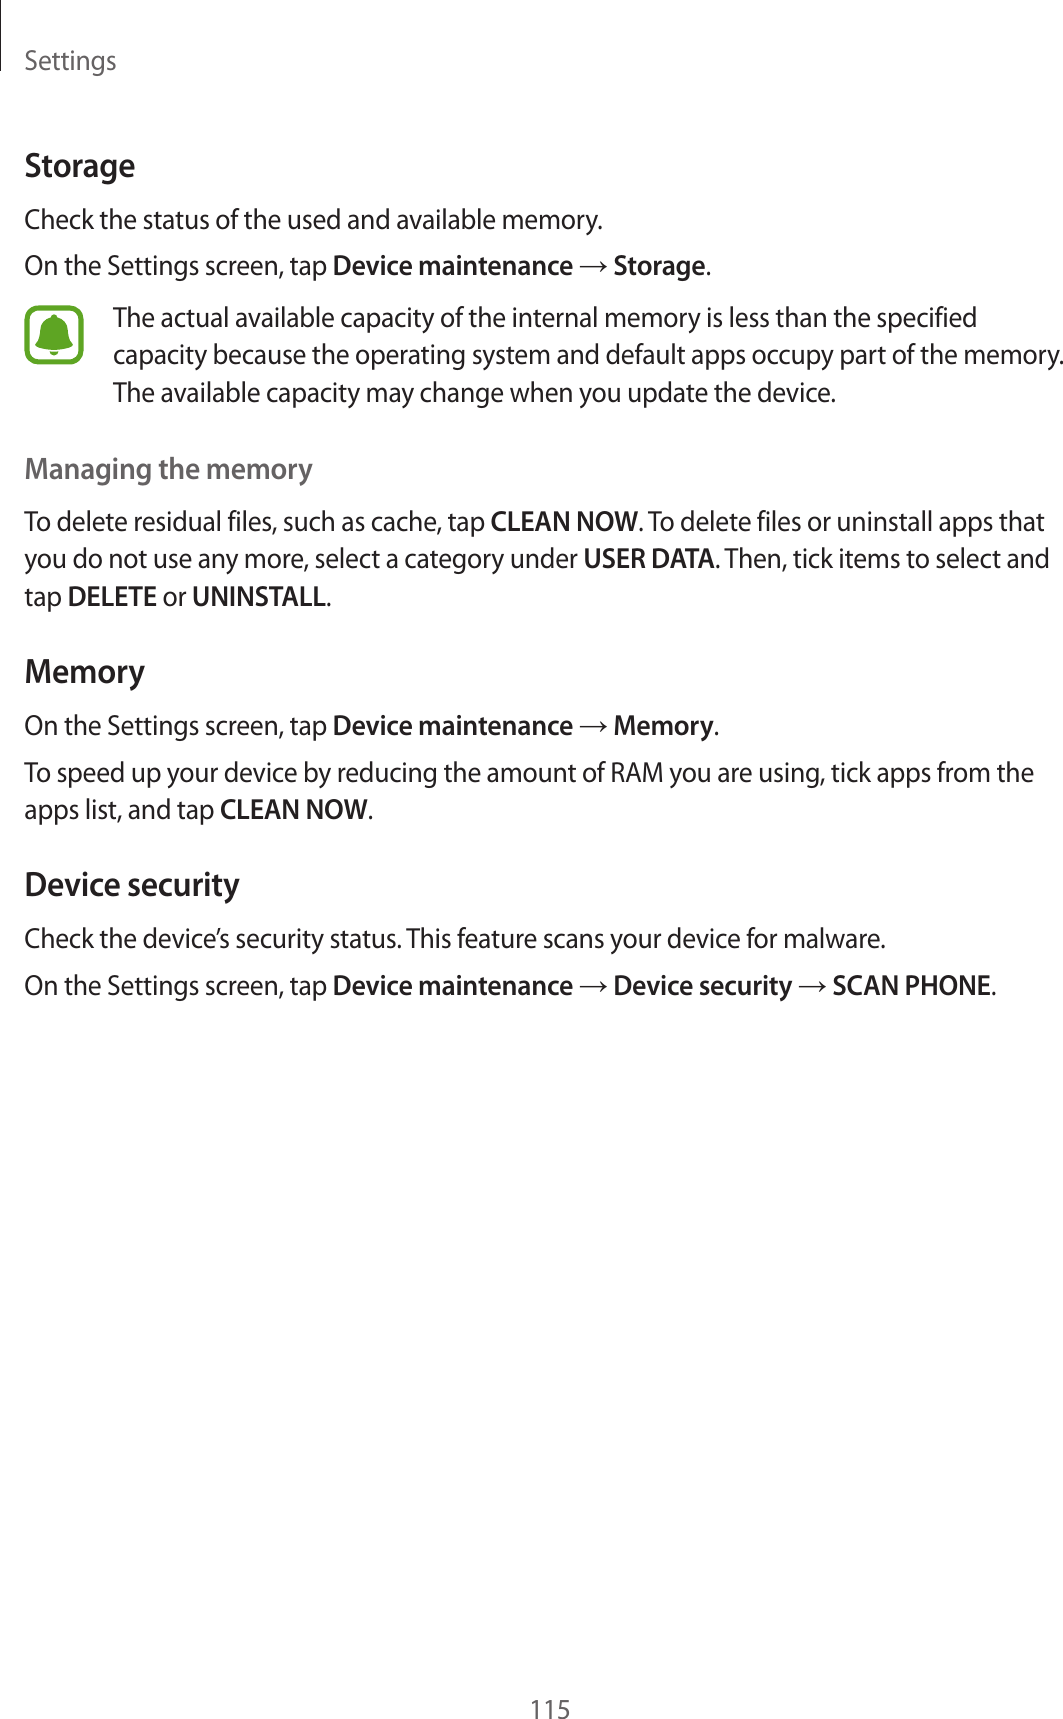 Settings115StorageCheck the status of the used and available memory.On the Settings screen, tap Device maintenance → Storage.The actual available capacity of the internal memory is less than the specified capacity because the operating system and default apps occupy part of the memory. The available capacity may change when you update the device.Managing the memoryTo delete residual files, such as cache, tap CLEAN NOW. To delete files or uninstall apps that you do not use any more, select a category under USER DATA. Then, tick items to select and tap DELETE or UNINSTALL.MemoryOn the Settings screen, tap Device maintenance → Memory.To speed up your device by reducing the amount of RAM you are using, tick apps from the apps list, and tap CLEAN NOW.Device securityCheck the device’s security status. This feature scans your device for malware.On the Settings screen, tap Device maintenance → Device security → SCAN PHONE.